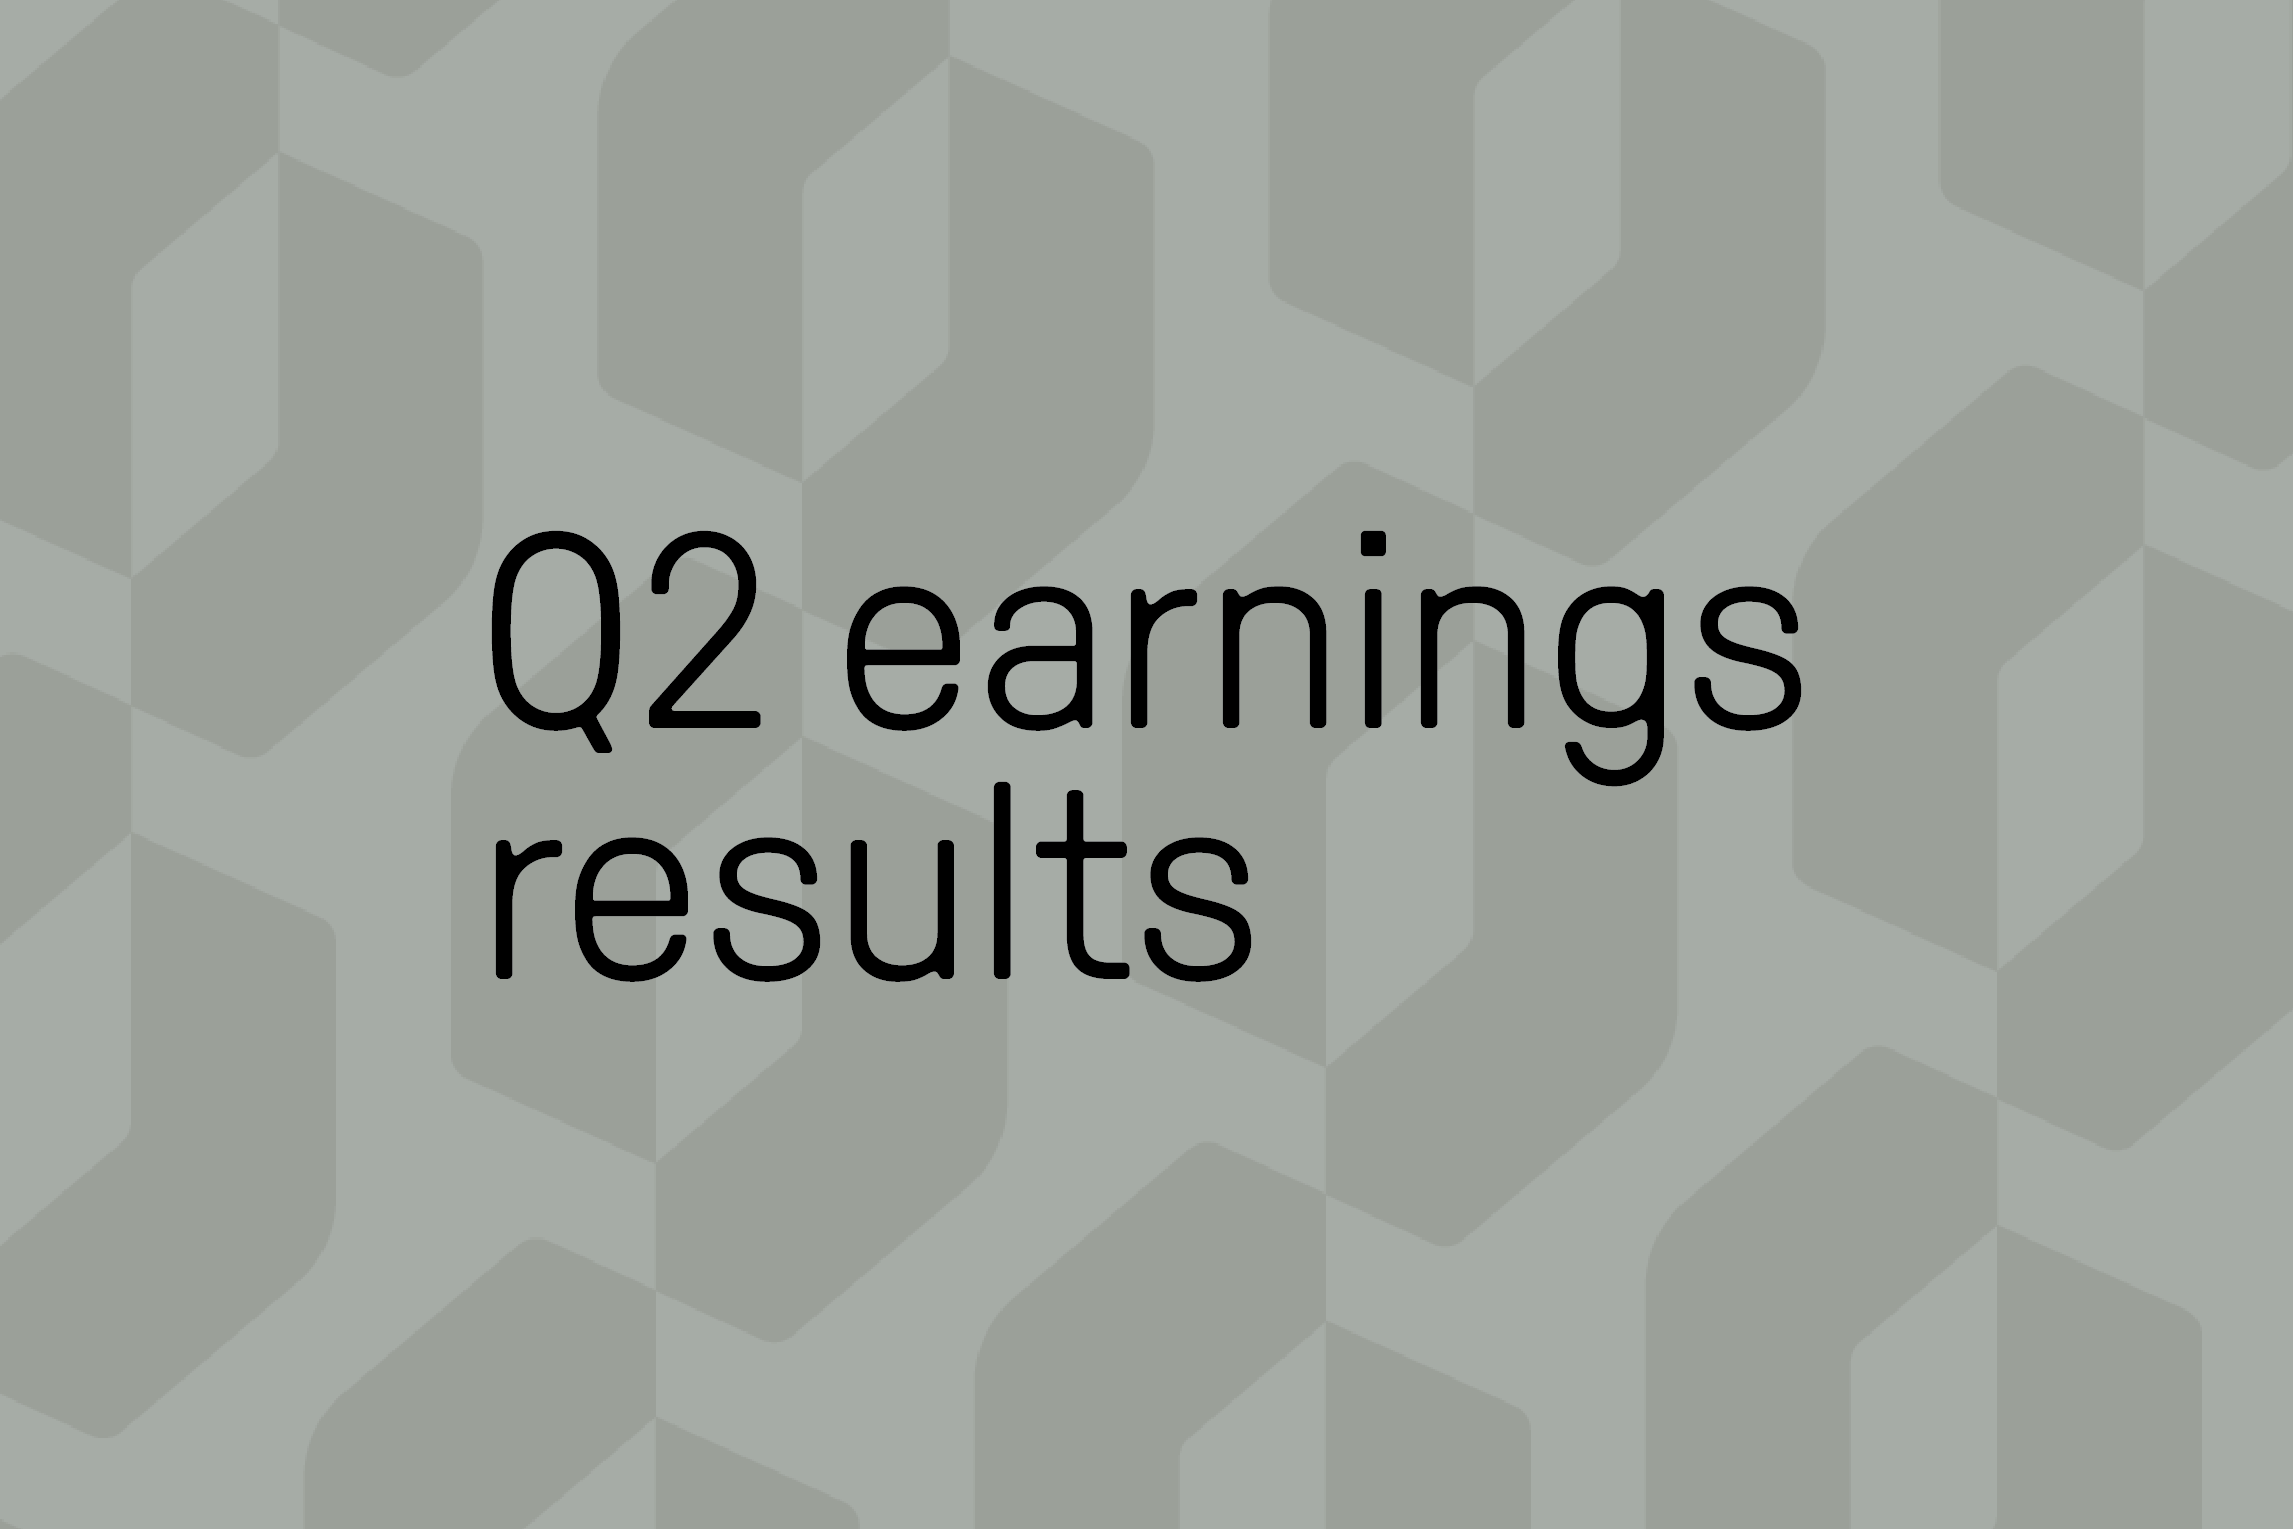 Grey logo pattern background with black text that reads Q2 earnings results